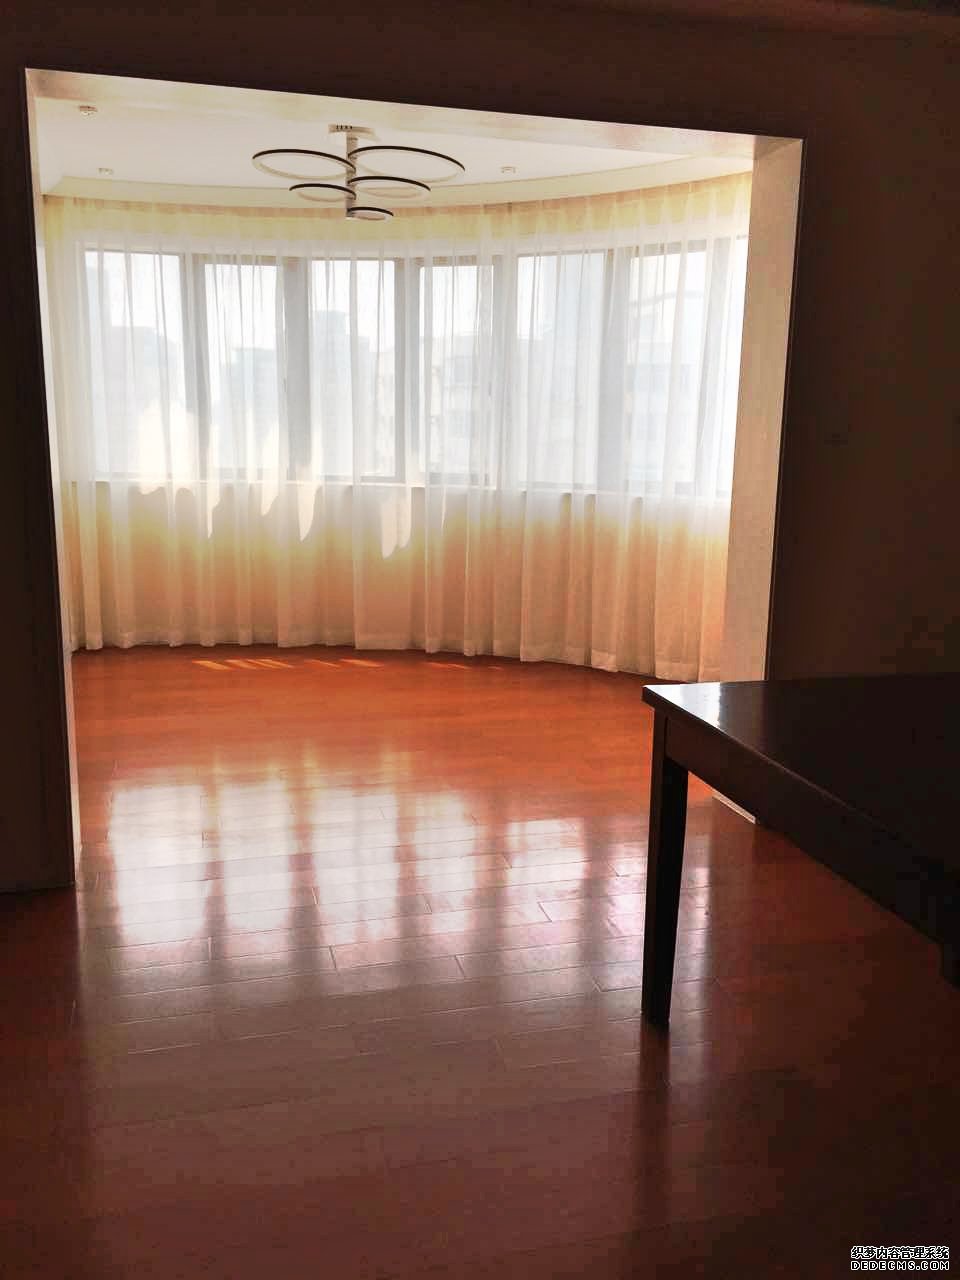 Apartment for rent in Shanghai Renovated 3BR Apartment for rent near Zhongshan Park